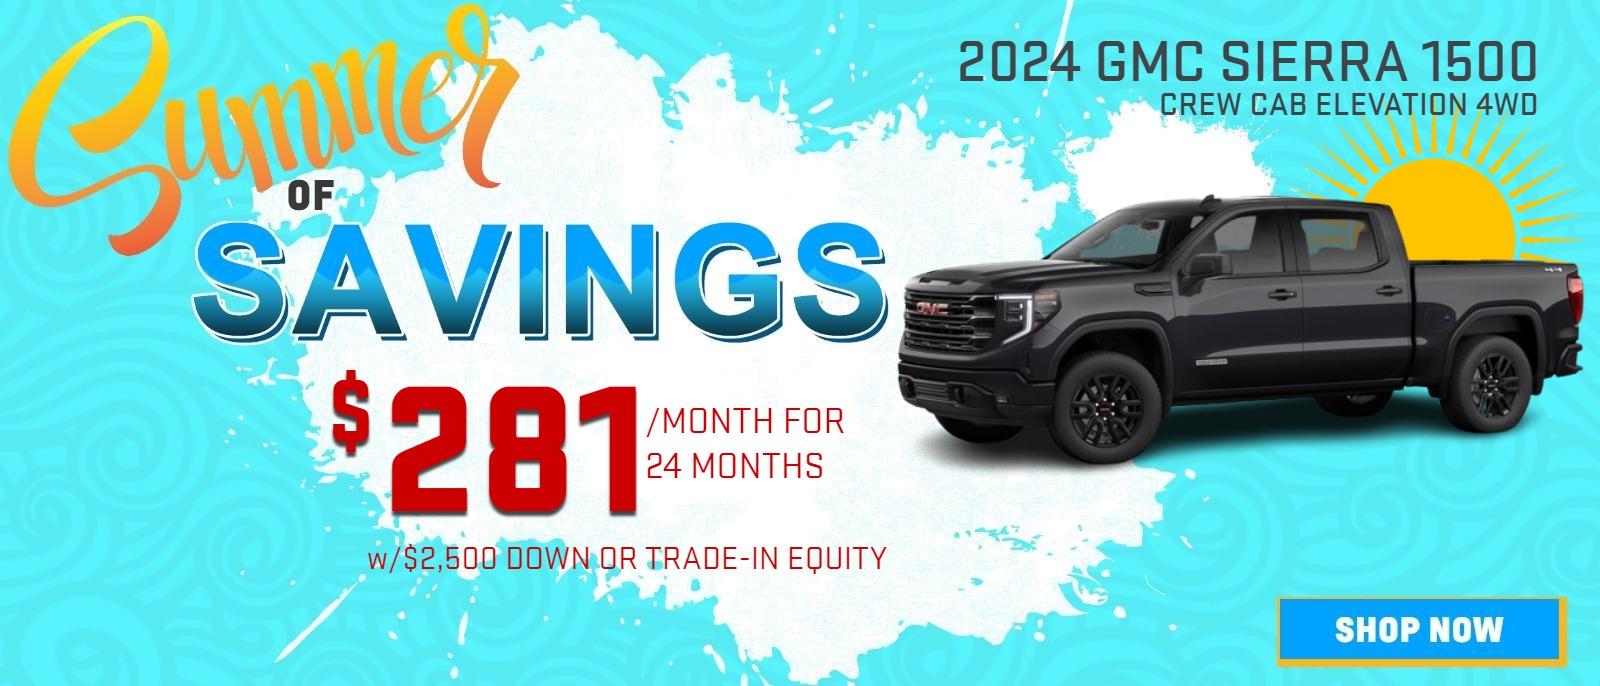 LEASE A 2024 SIERRA 1500 CREW CAB ELEVATION TRUCK FOR $281 PER MONTH FOR 24 MONTHS FROM MIKE YOUNG BUICK GMC IN FRANKENMUTH, MI